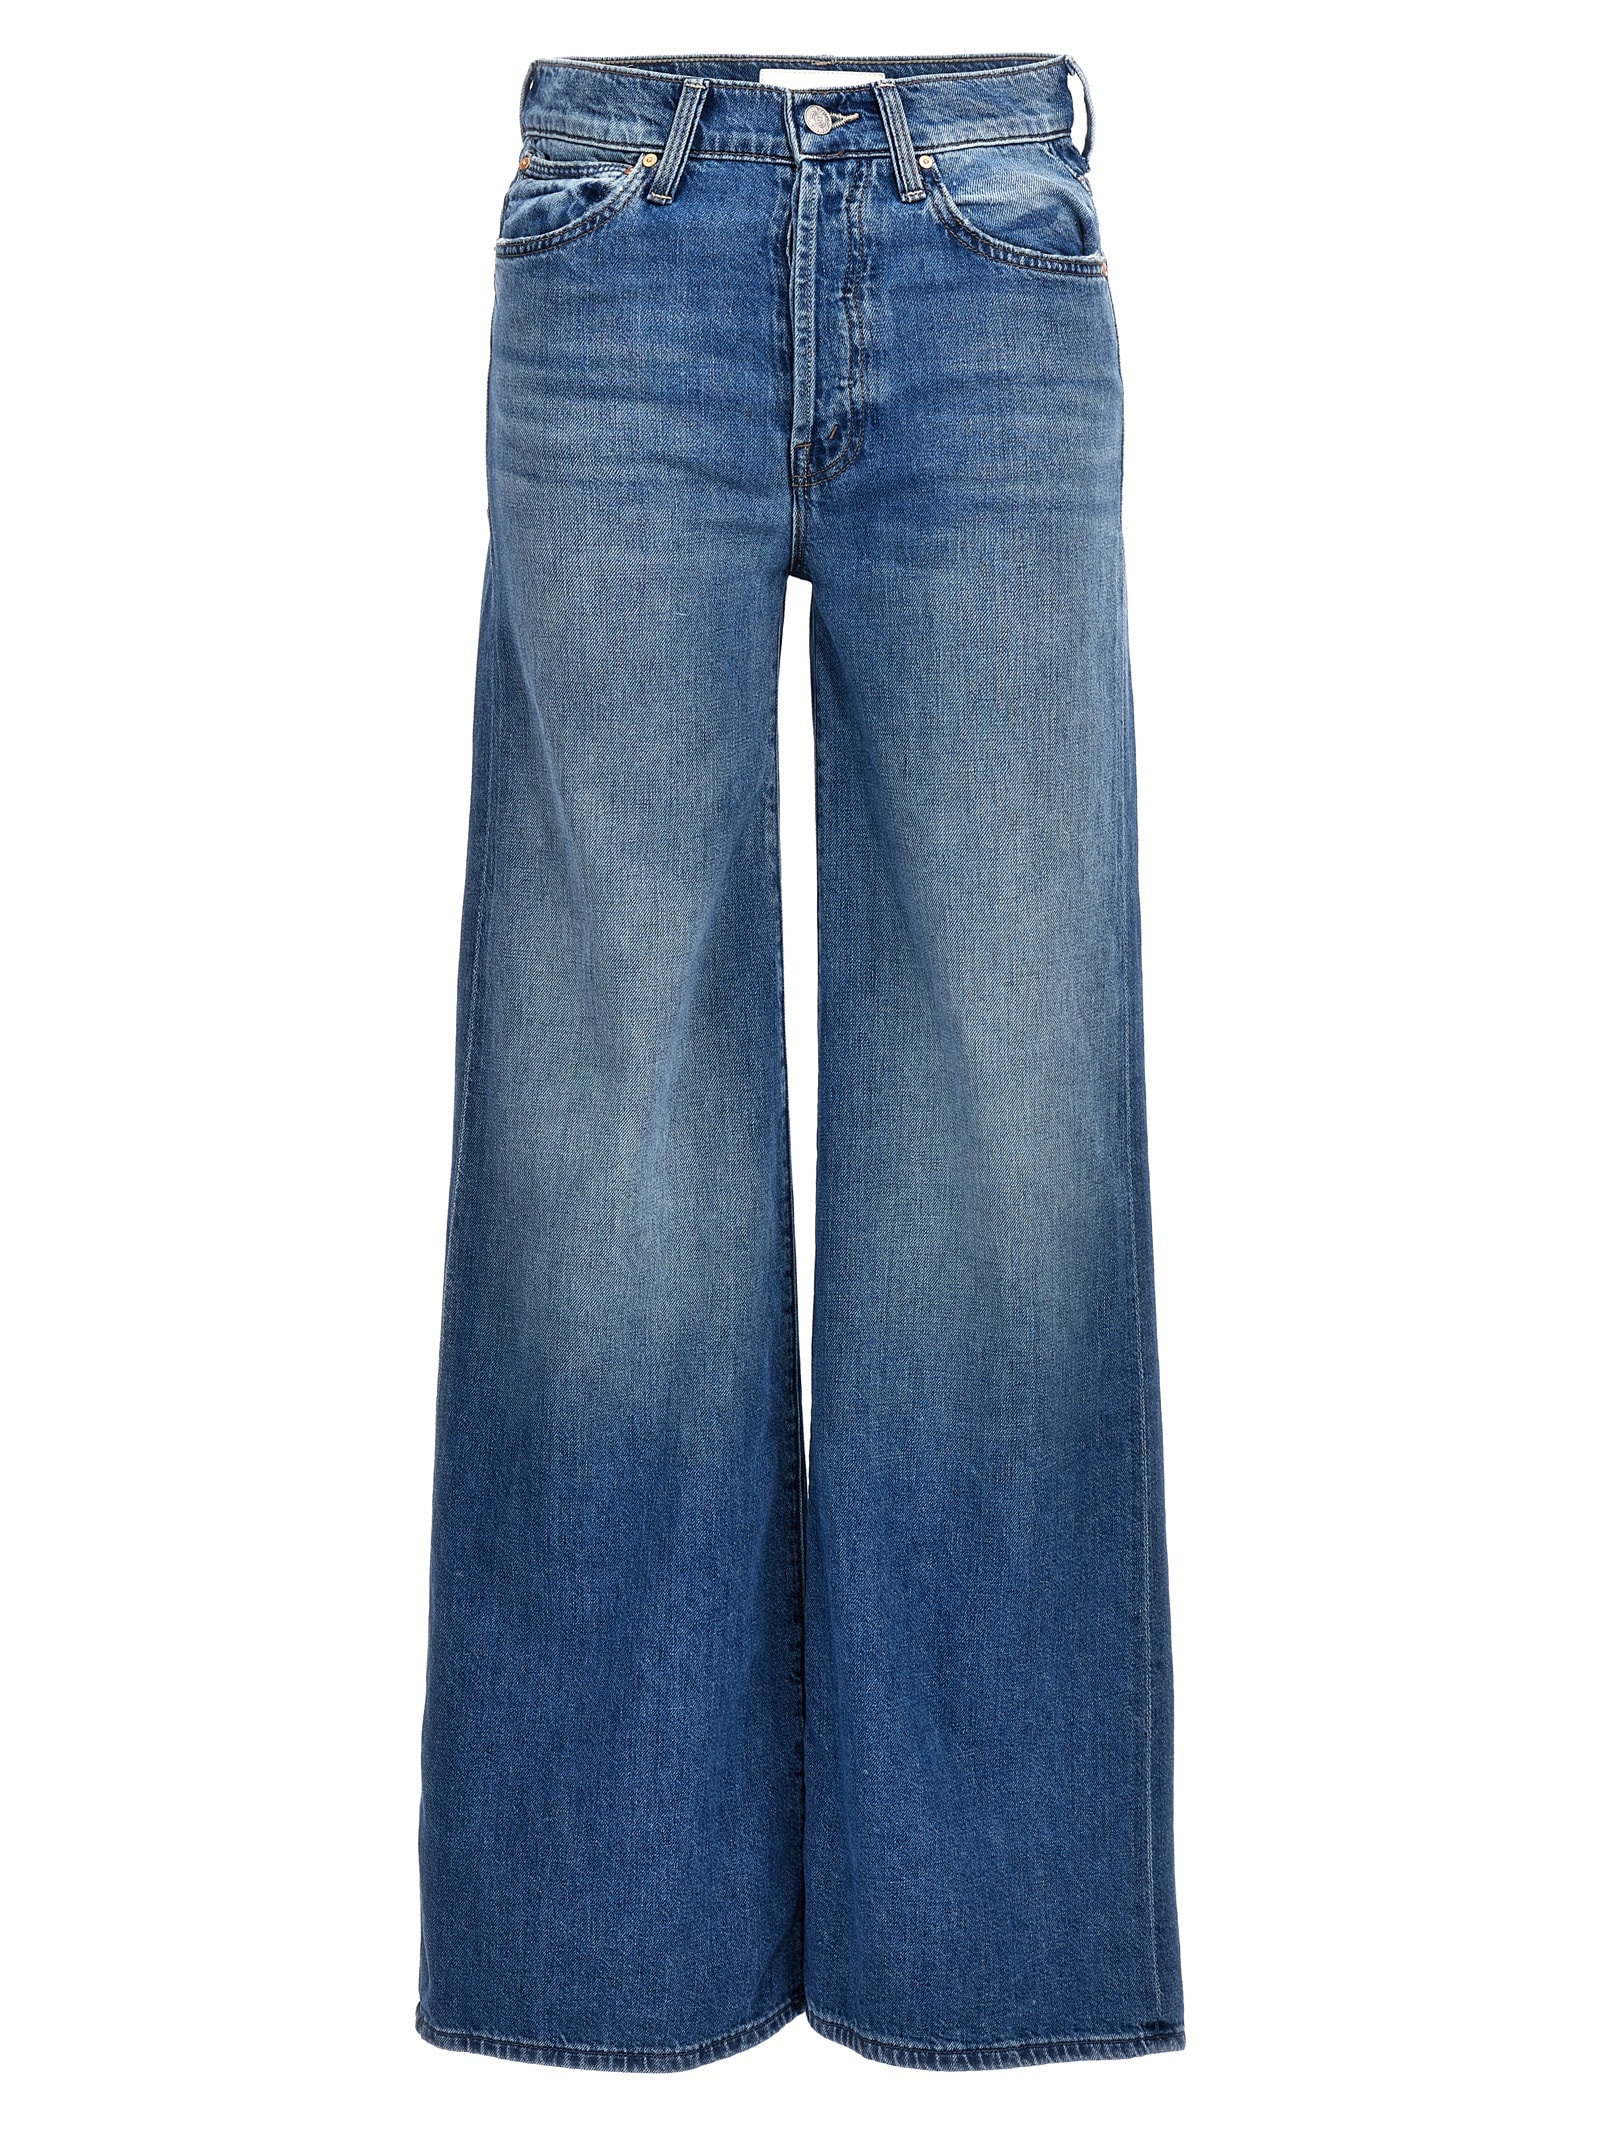 the Ditcher Roller Sneak Jeans